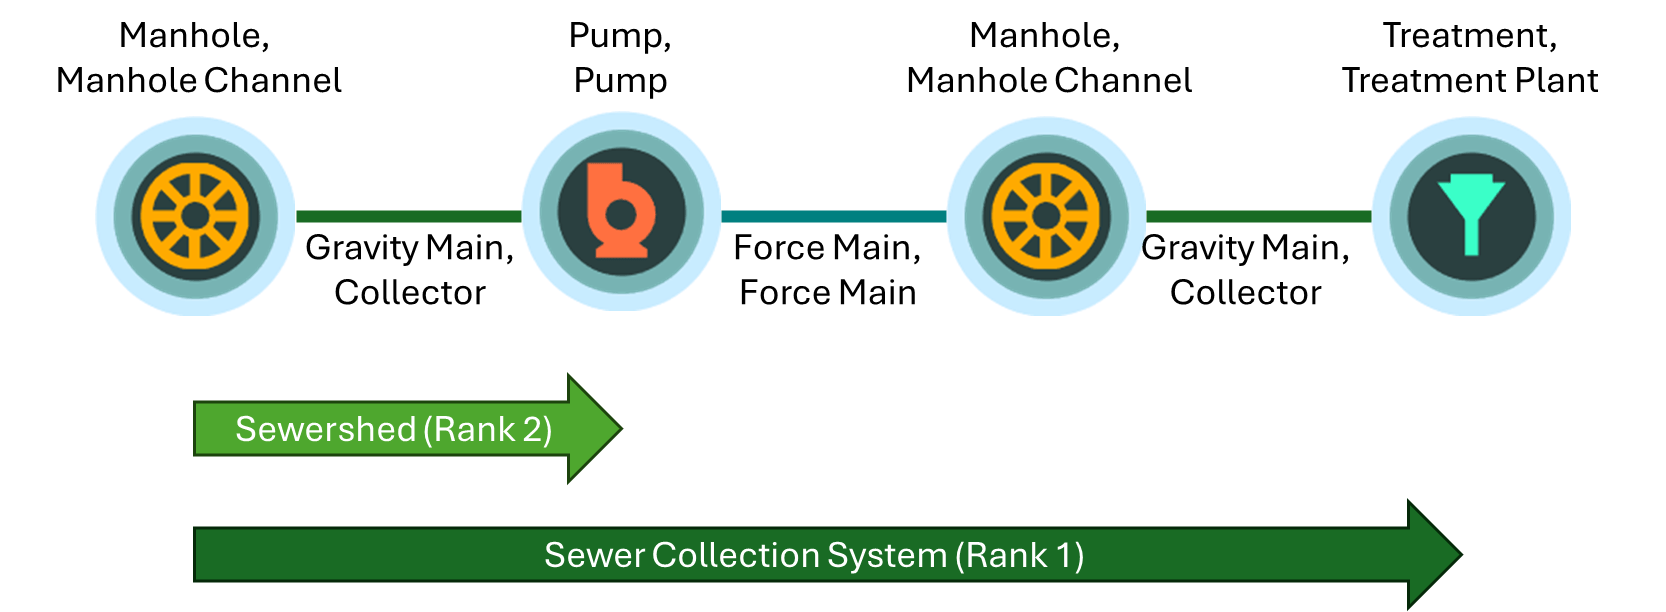 This graphics shows a partitioned representation of sewer subneteworks. The sewershed subnetwork starts at a cleanout and goes to a pump. The Sewer collection system starts at the pump and goes to the treatment plant.